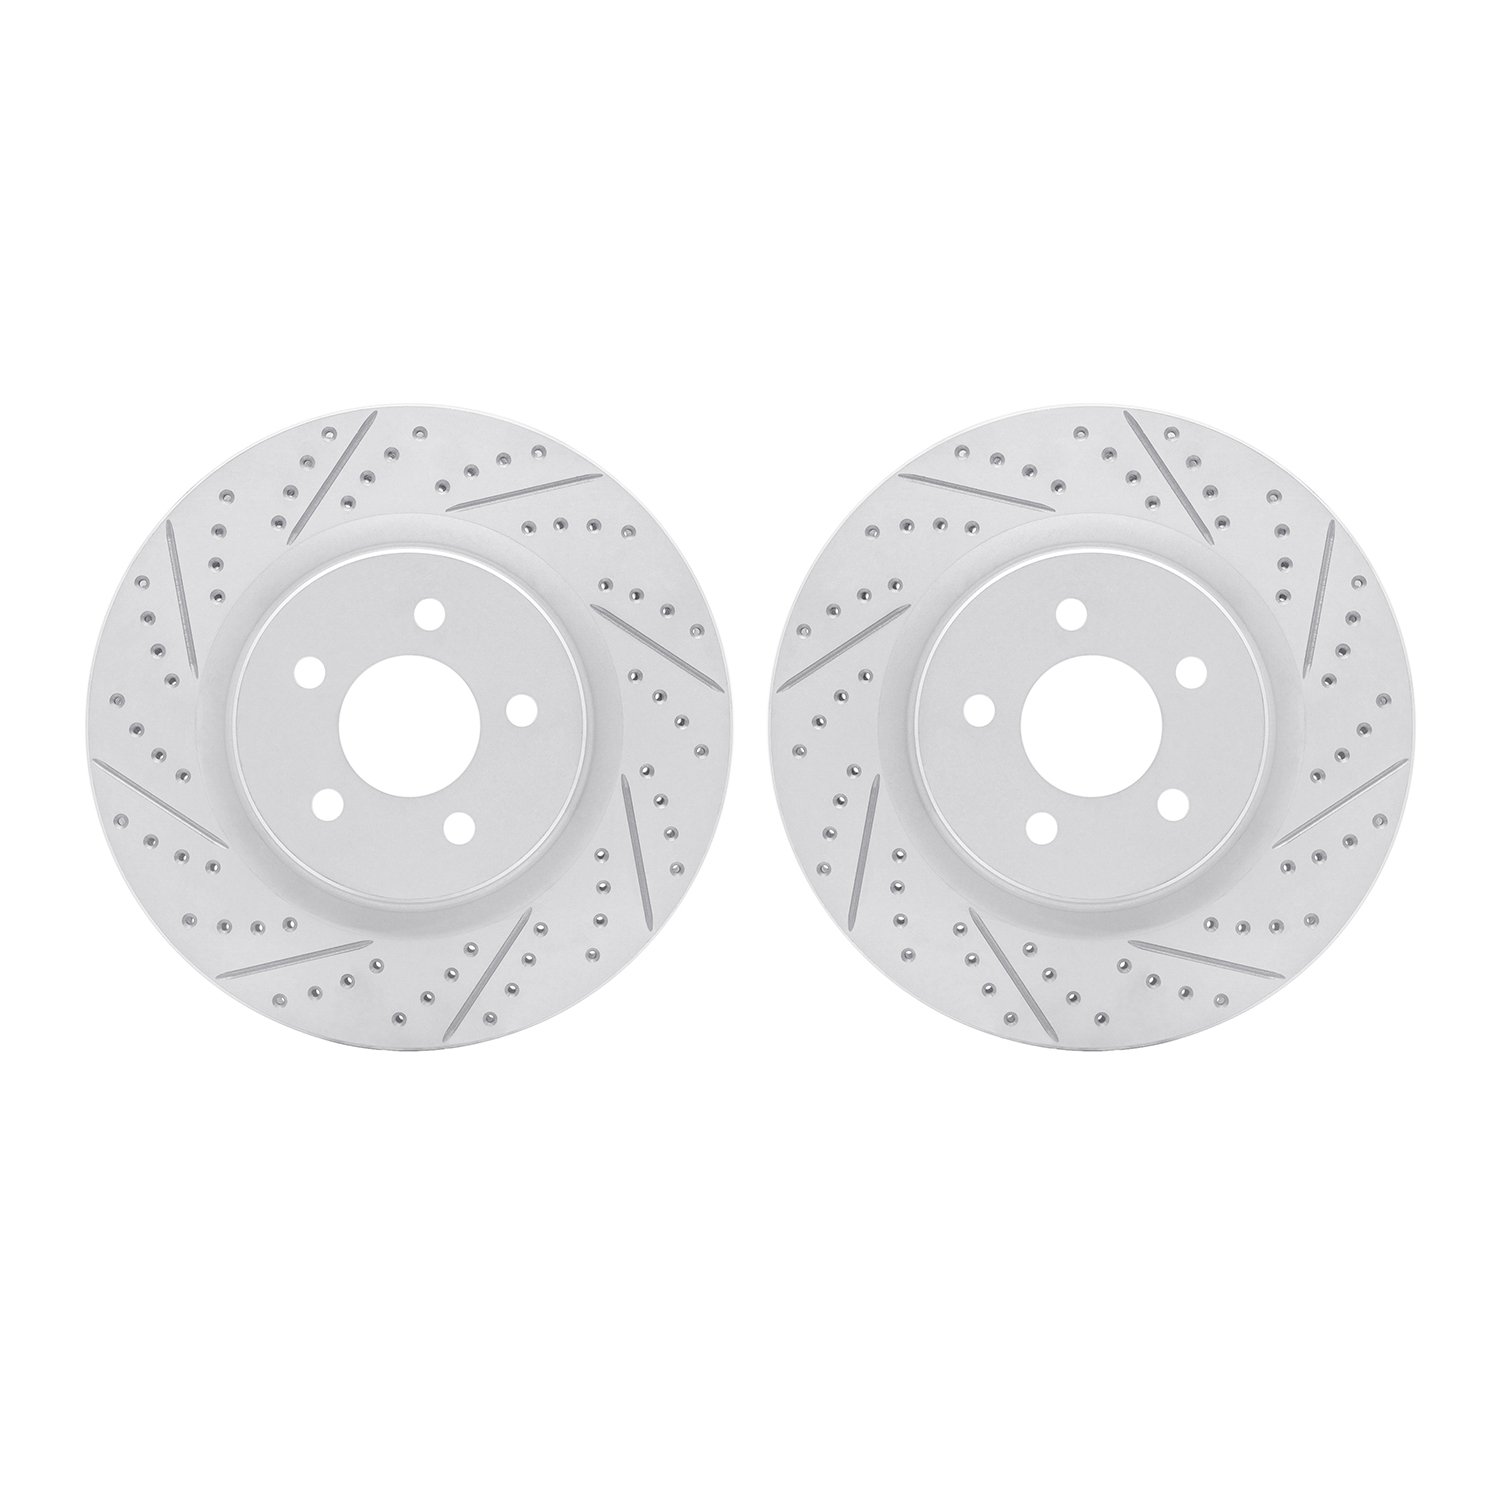 2002-54093 Geoperformance Drilled/Slotted Brake Rotors, 1994-2004 Ford/Lincoln/Mercury/Mazda, Position: Front